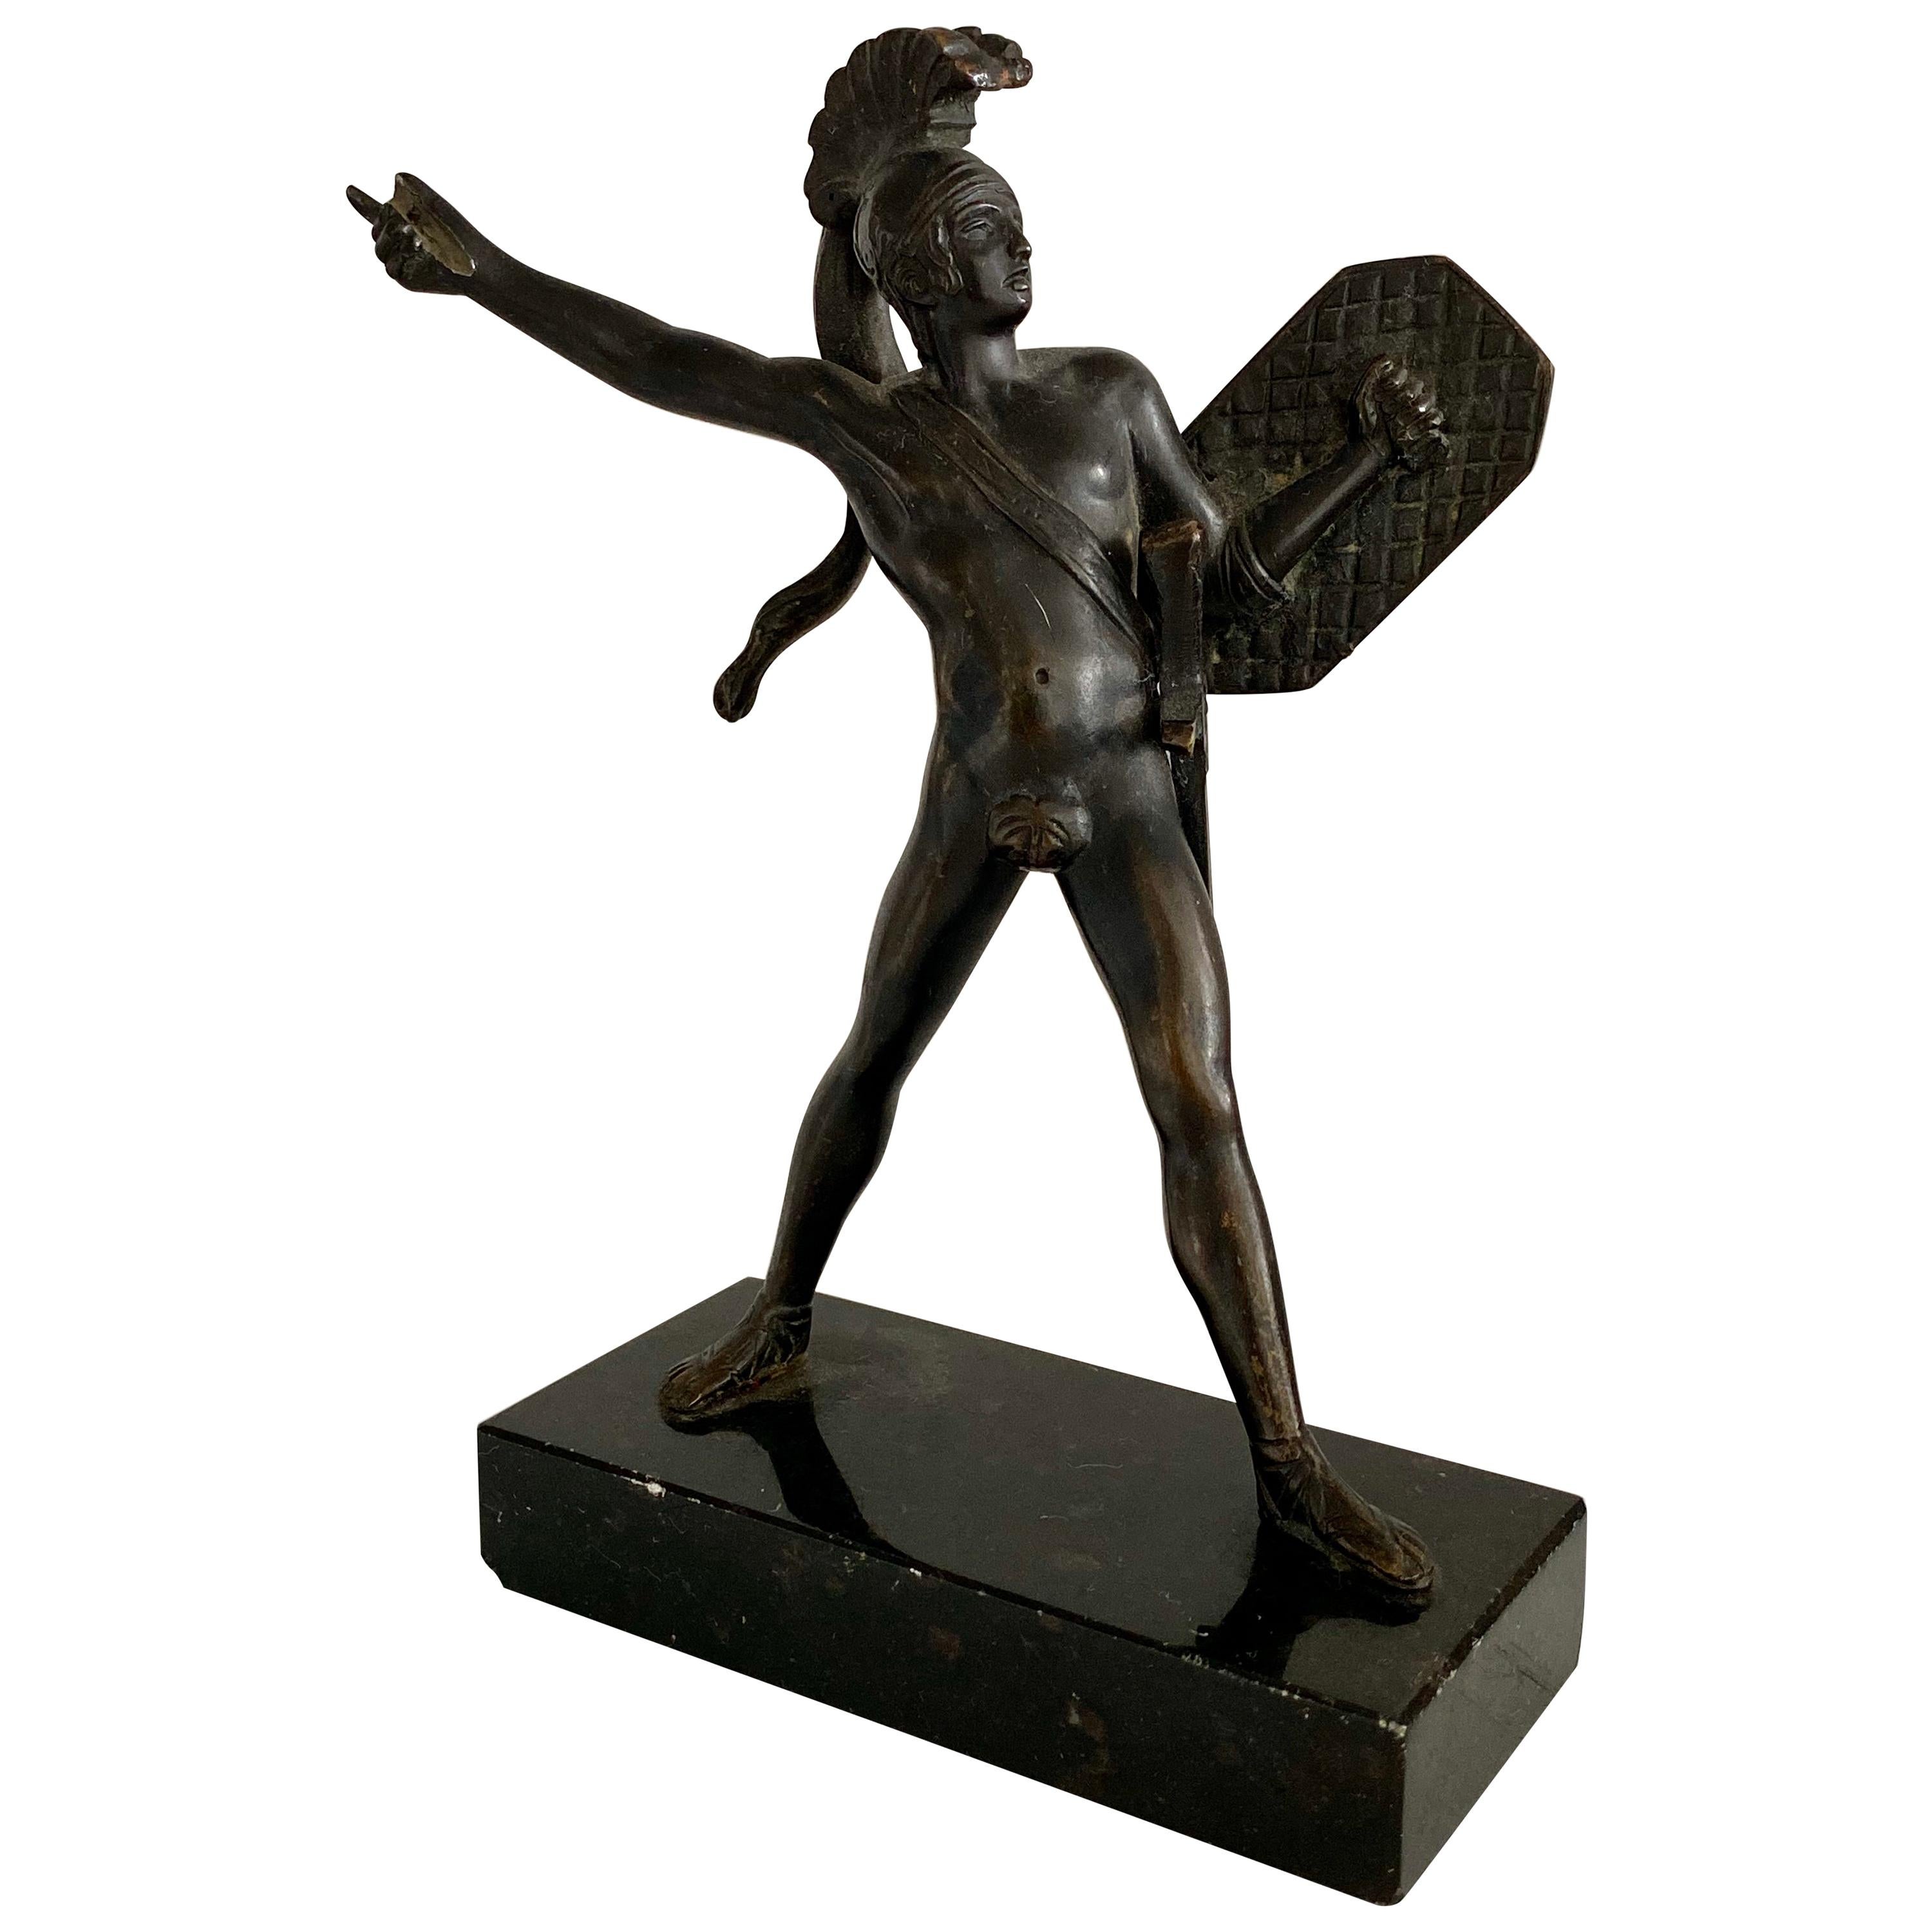 Bronze Statuette of Achilles from the Trojan War, French, 19th Century